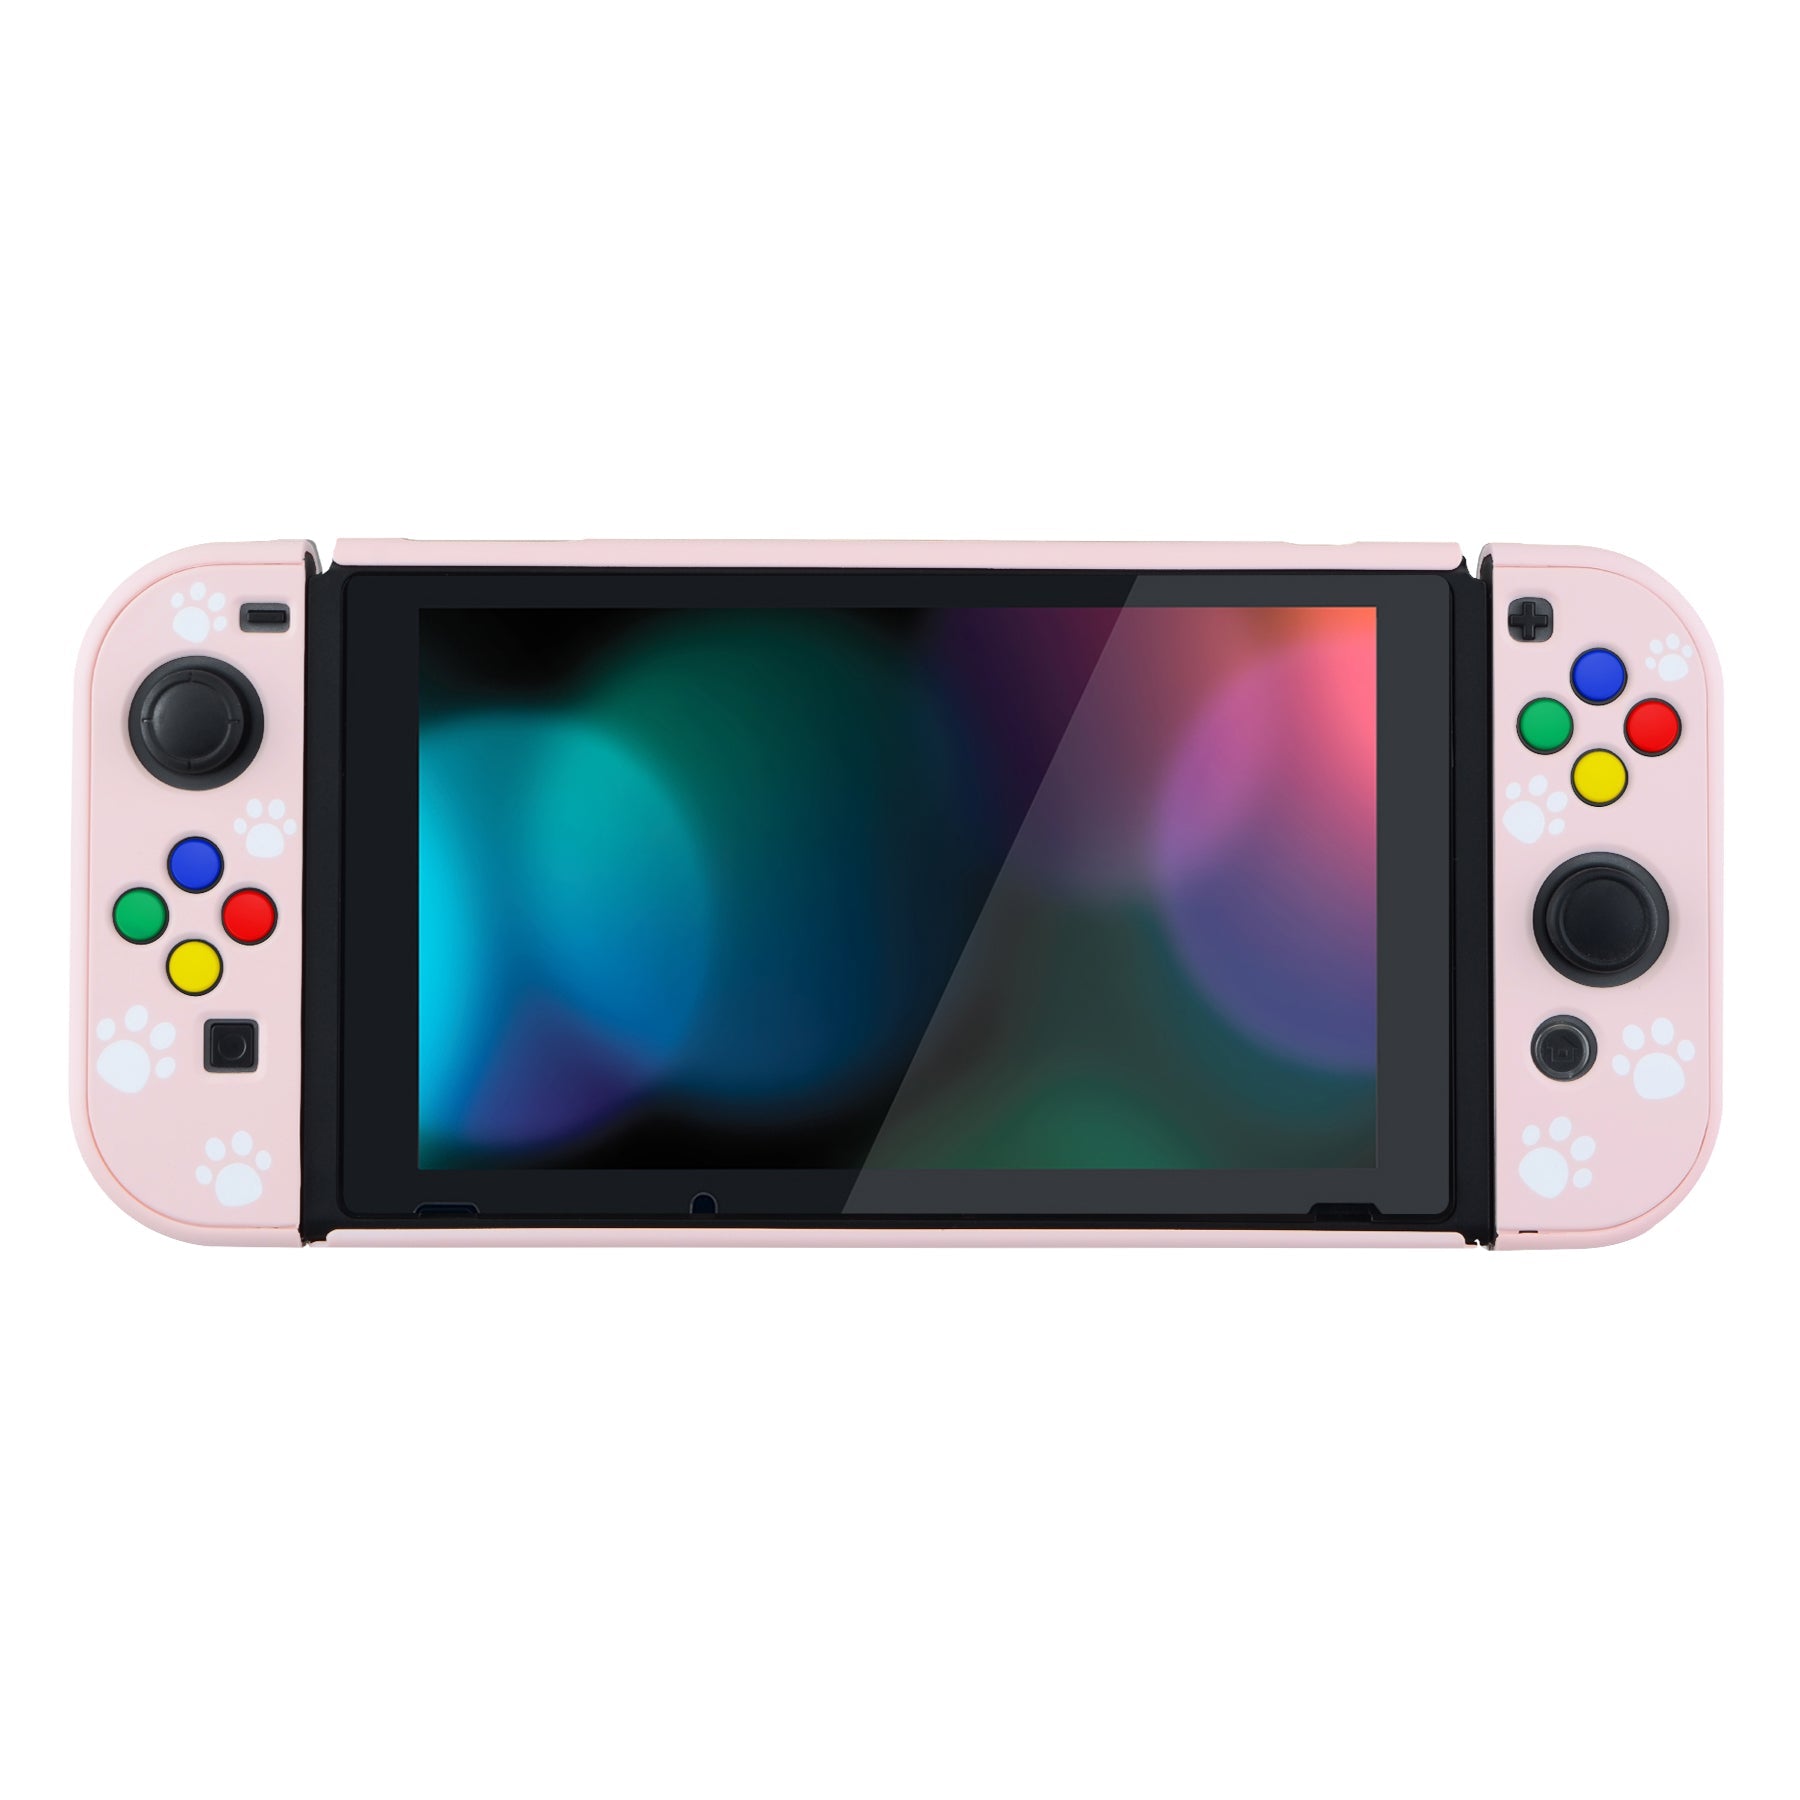 PlayVital Pink Cat Paw Back Cover for NS Switch Console, NS Joycon Handheld Controller Separable Protector Hard Shell, Dockable Protective Case with Colorful ABXY Direction Button Caps - NTT101 PlayVital